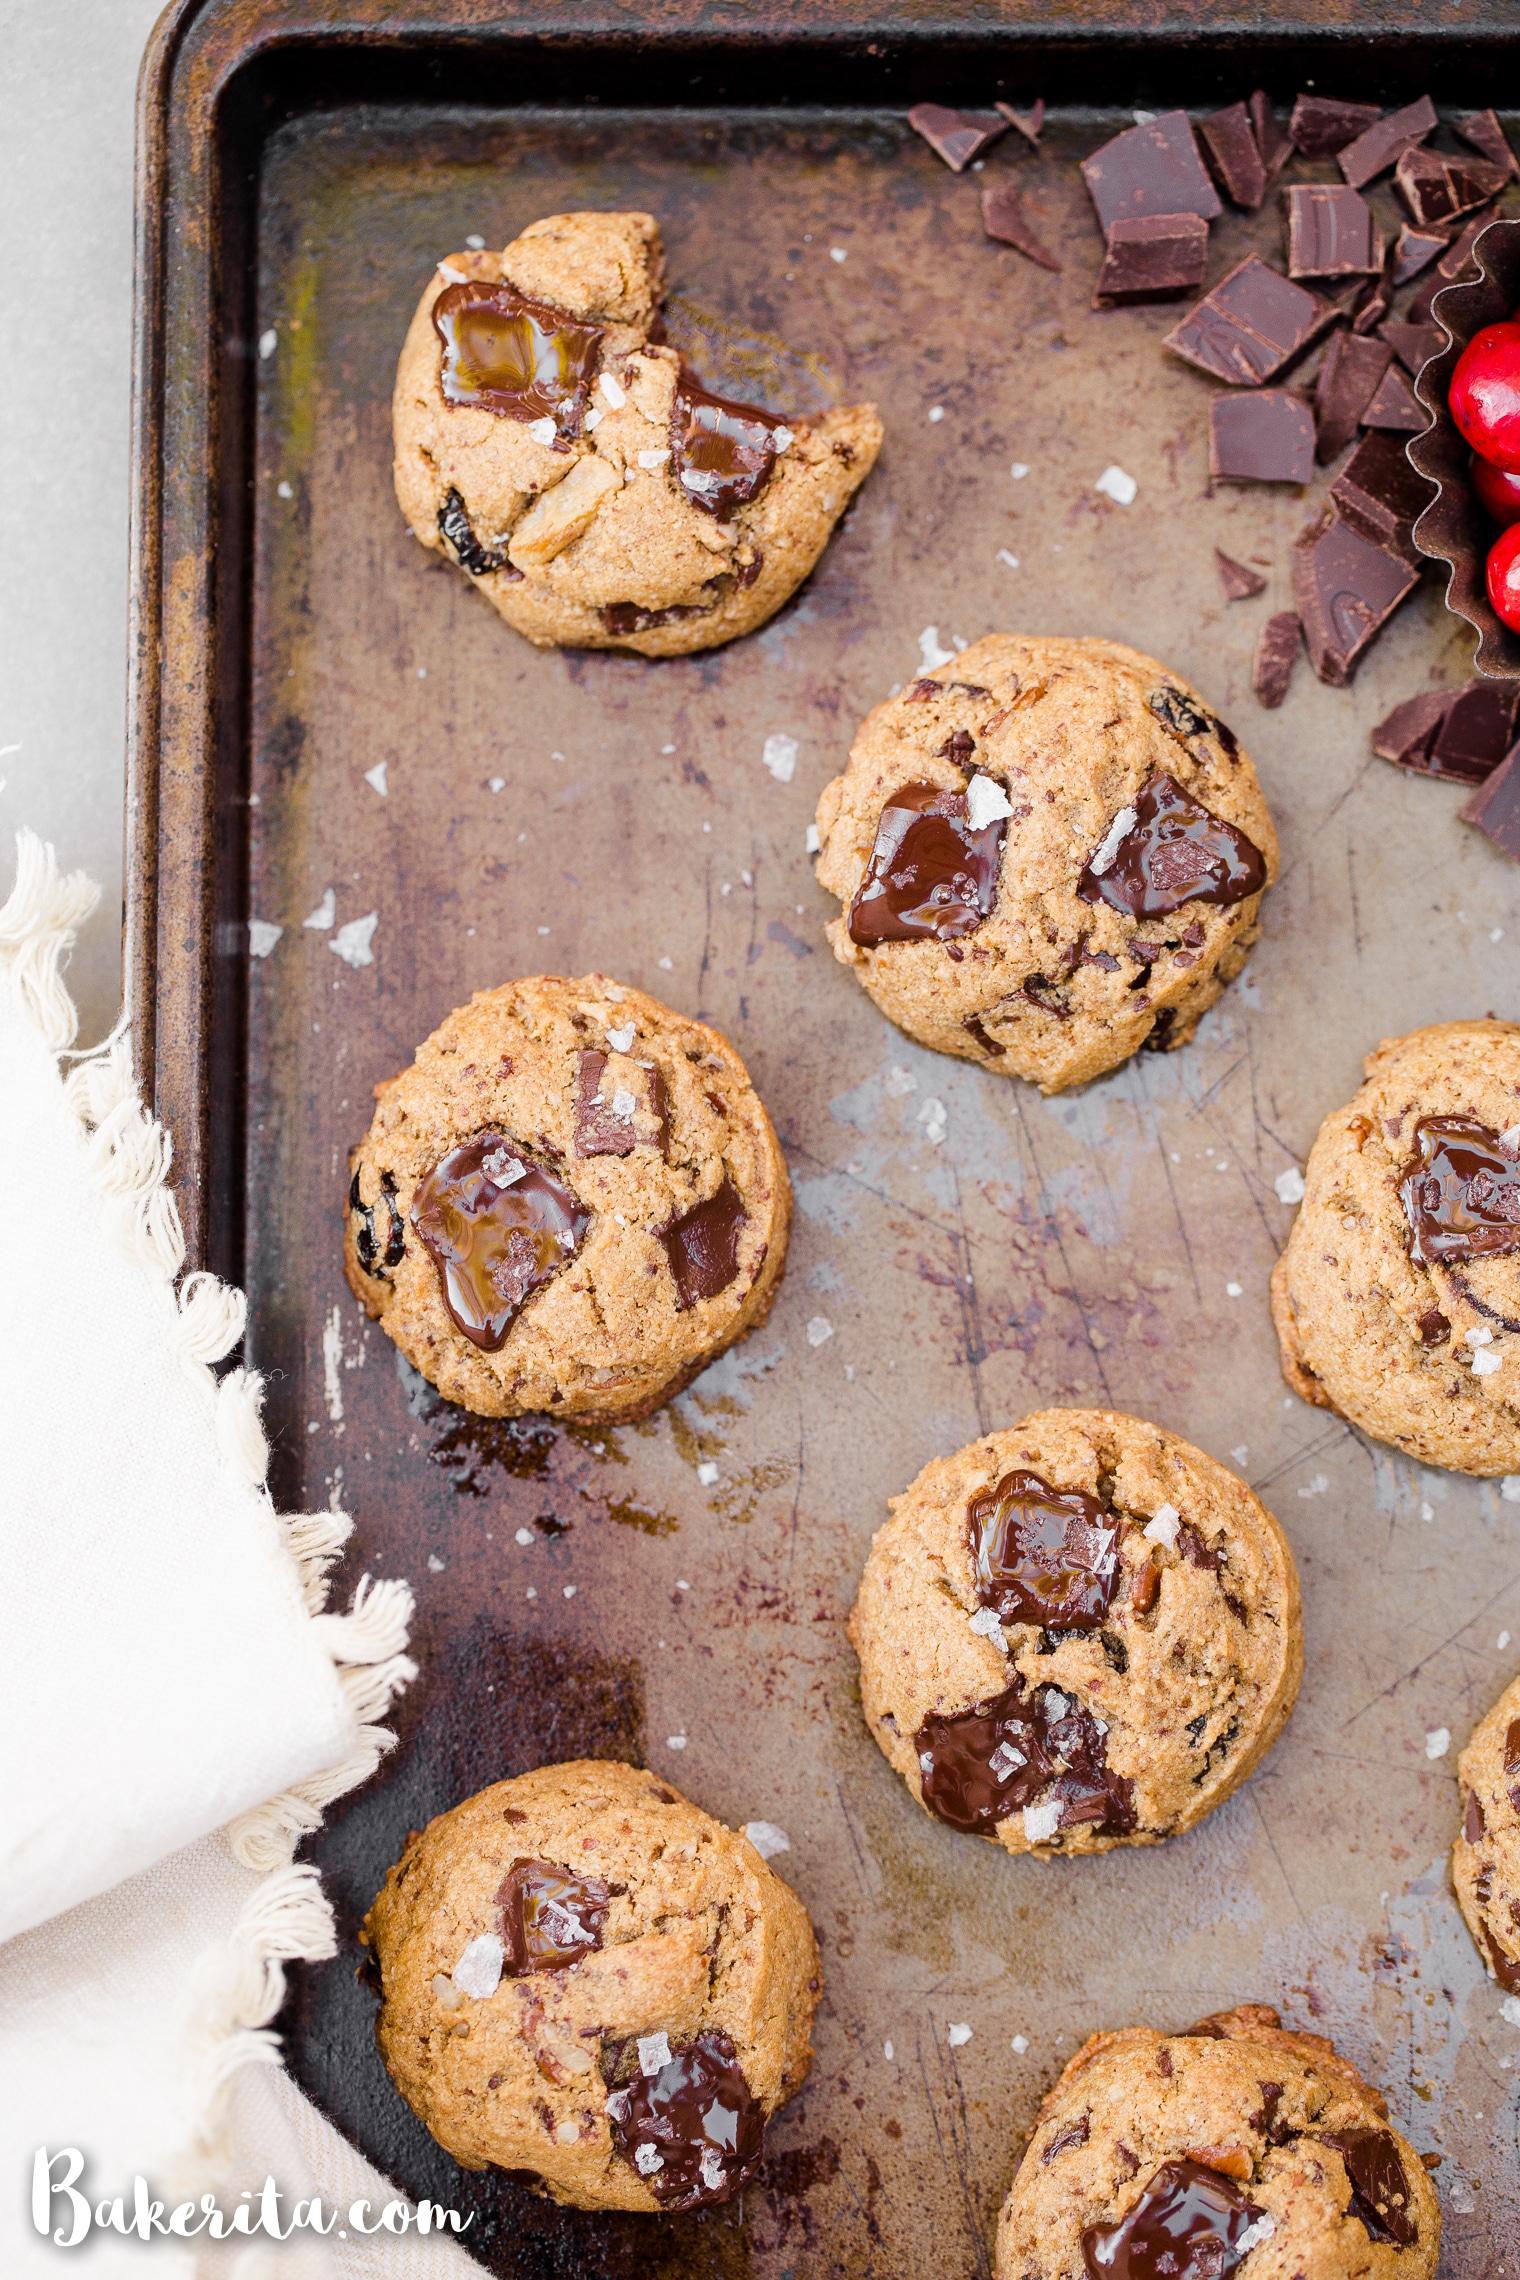 These Cranberry Pecan Chocolate Chip Cookies are gooey in the middle with perfectly crispy edges. Think: your favorite chocolate chip cookie, dressed up with dried cranberries and toasty pecans. I recommend devouring one of these gluten-free, paleo, and vegan cookies warm from the oven.